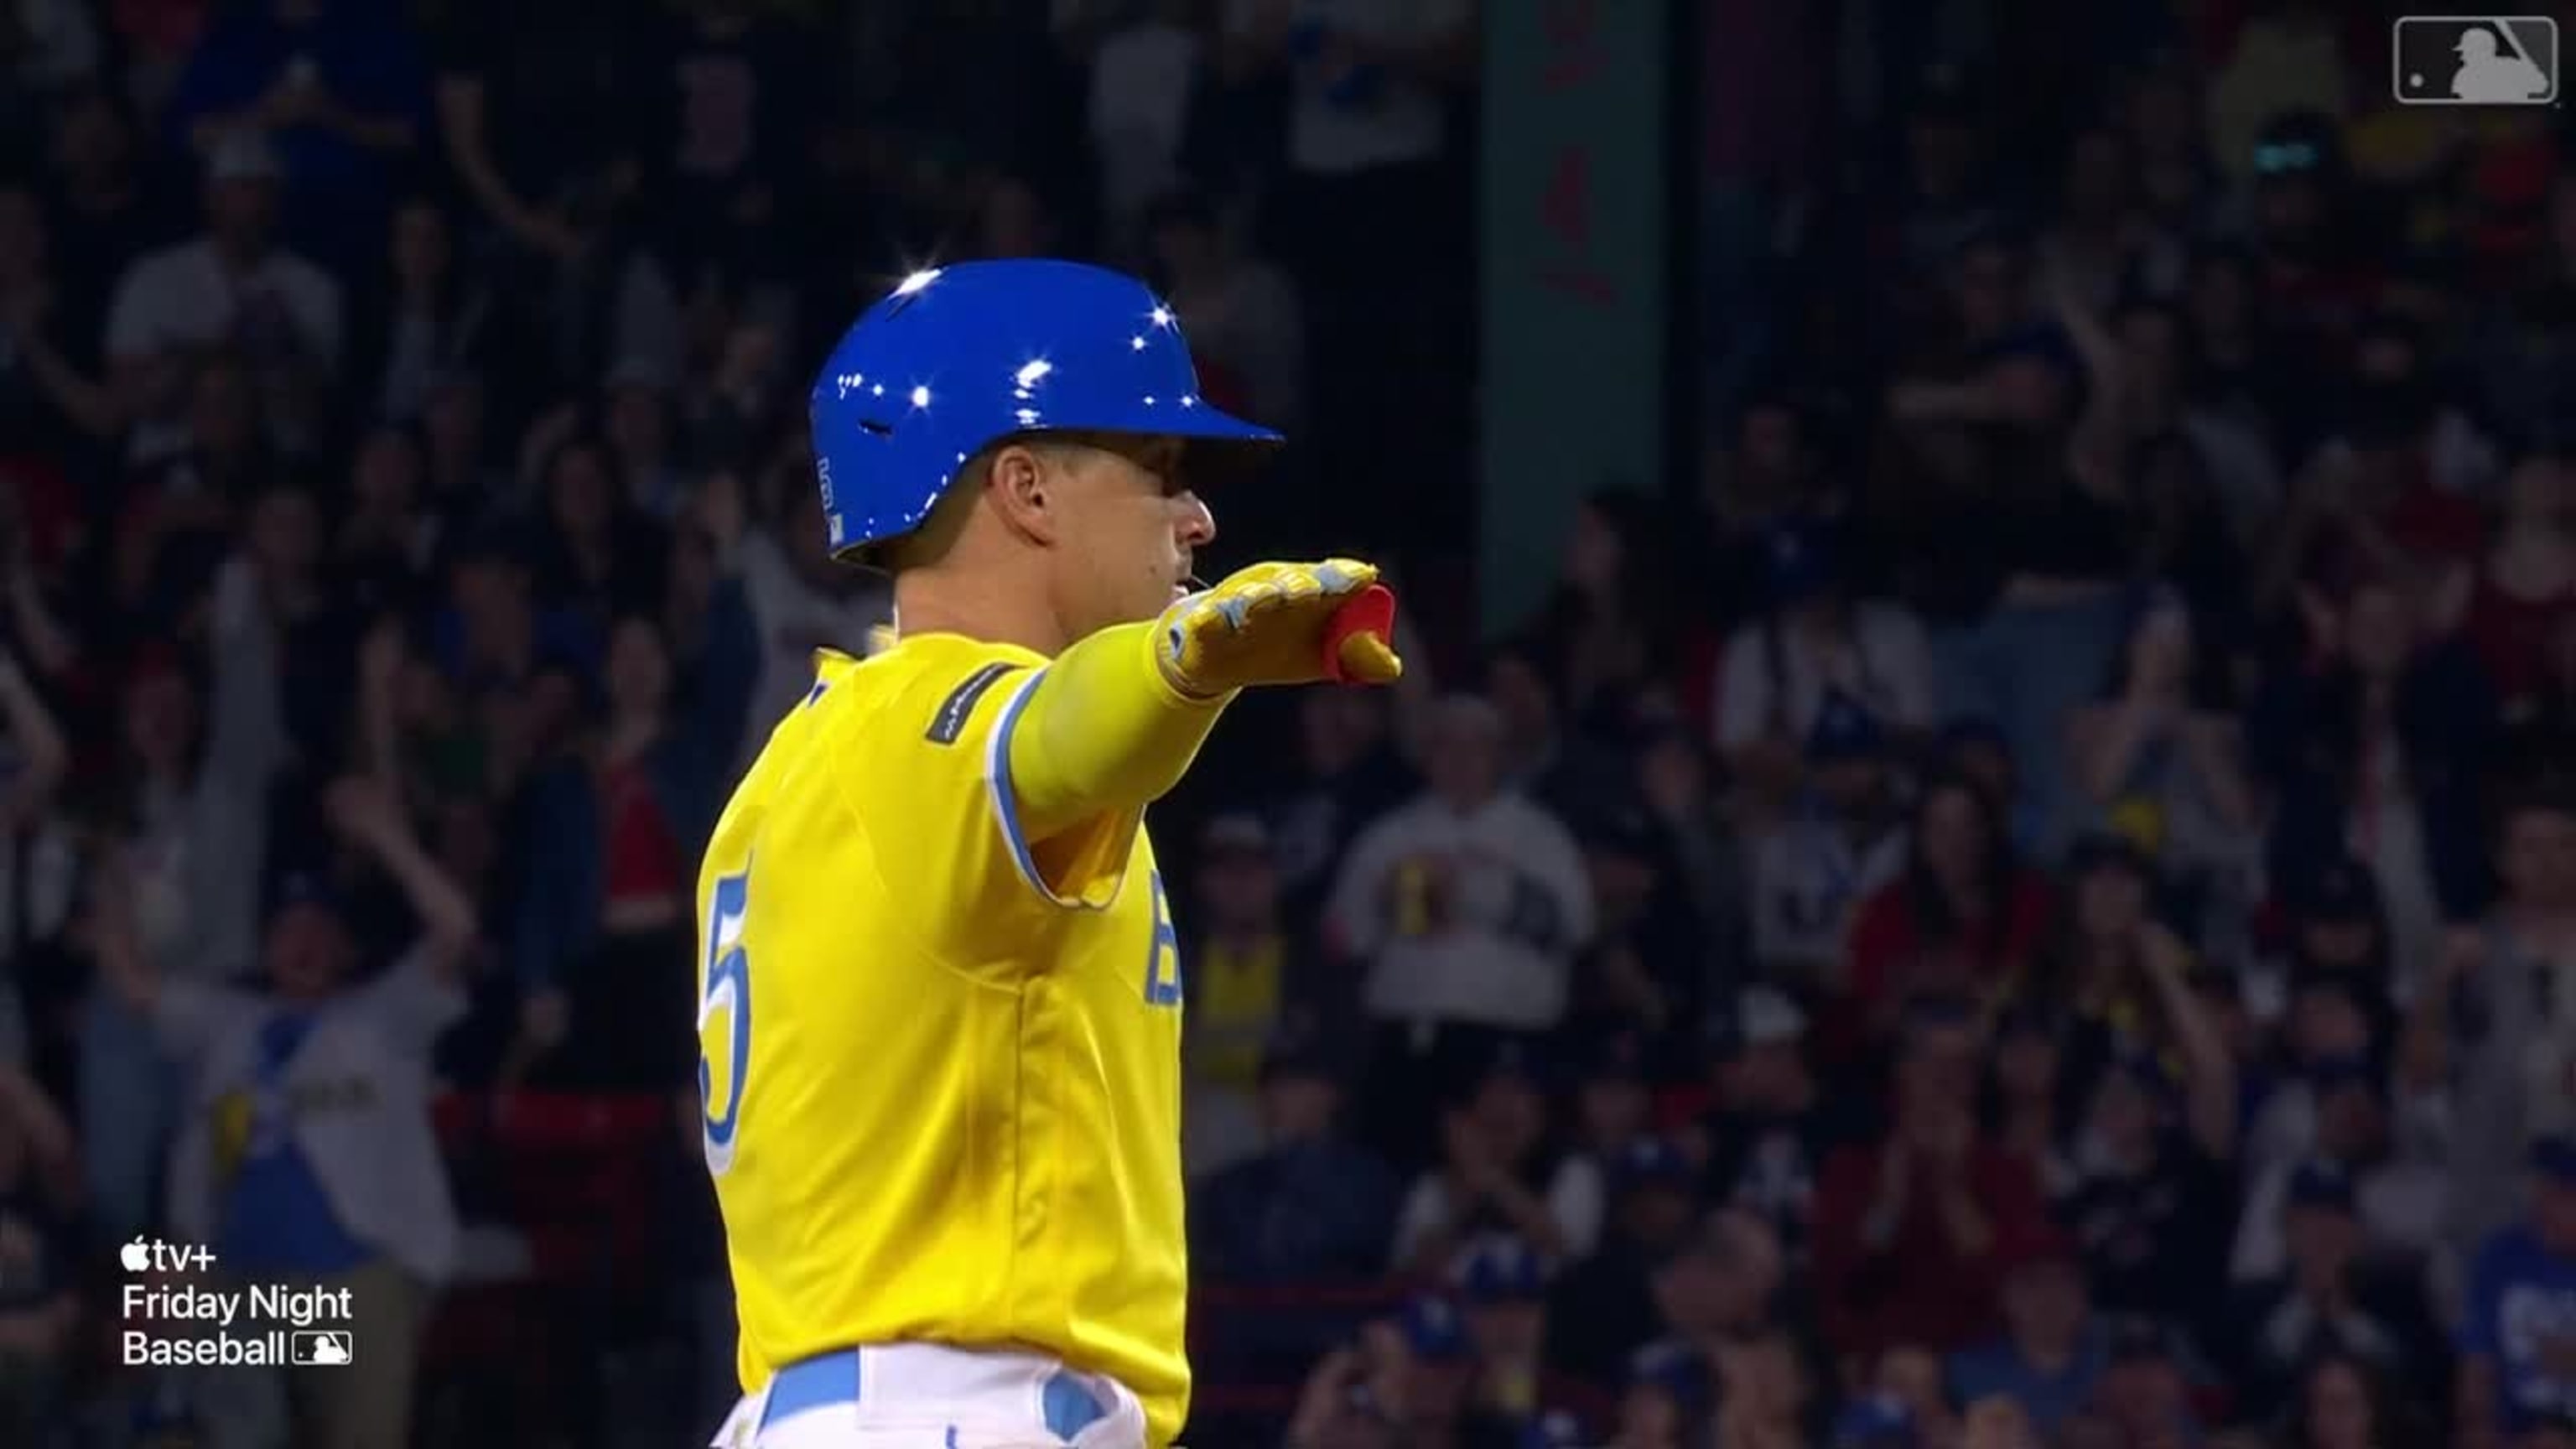 Why are the Boston Red Sox wearing yellow and blue uniforms today?